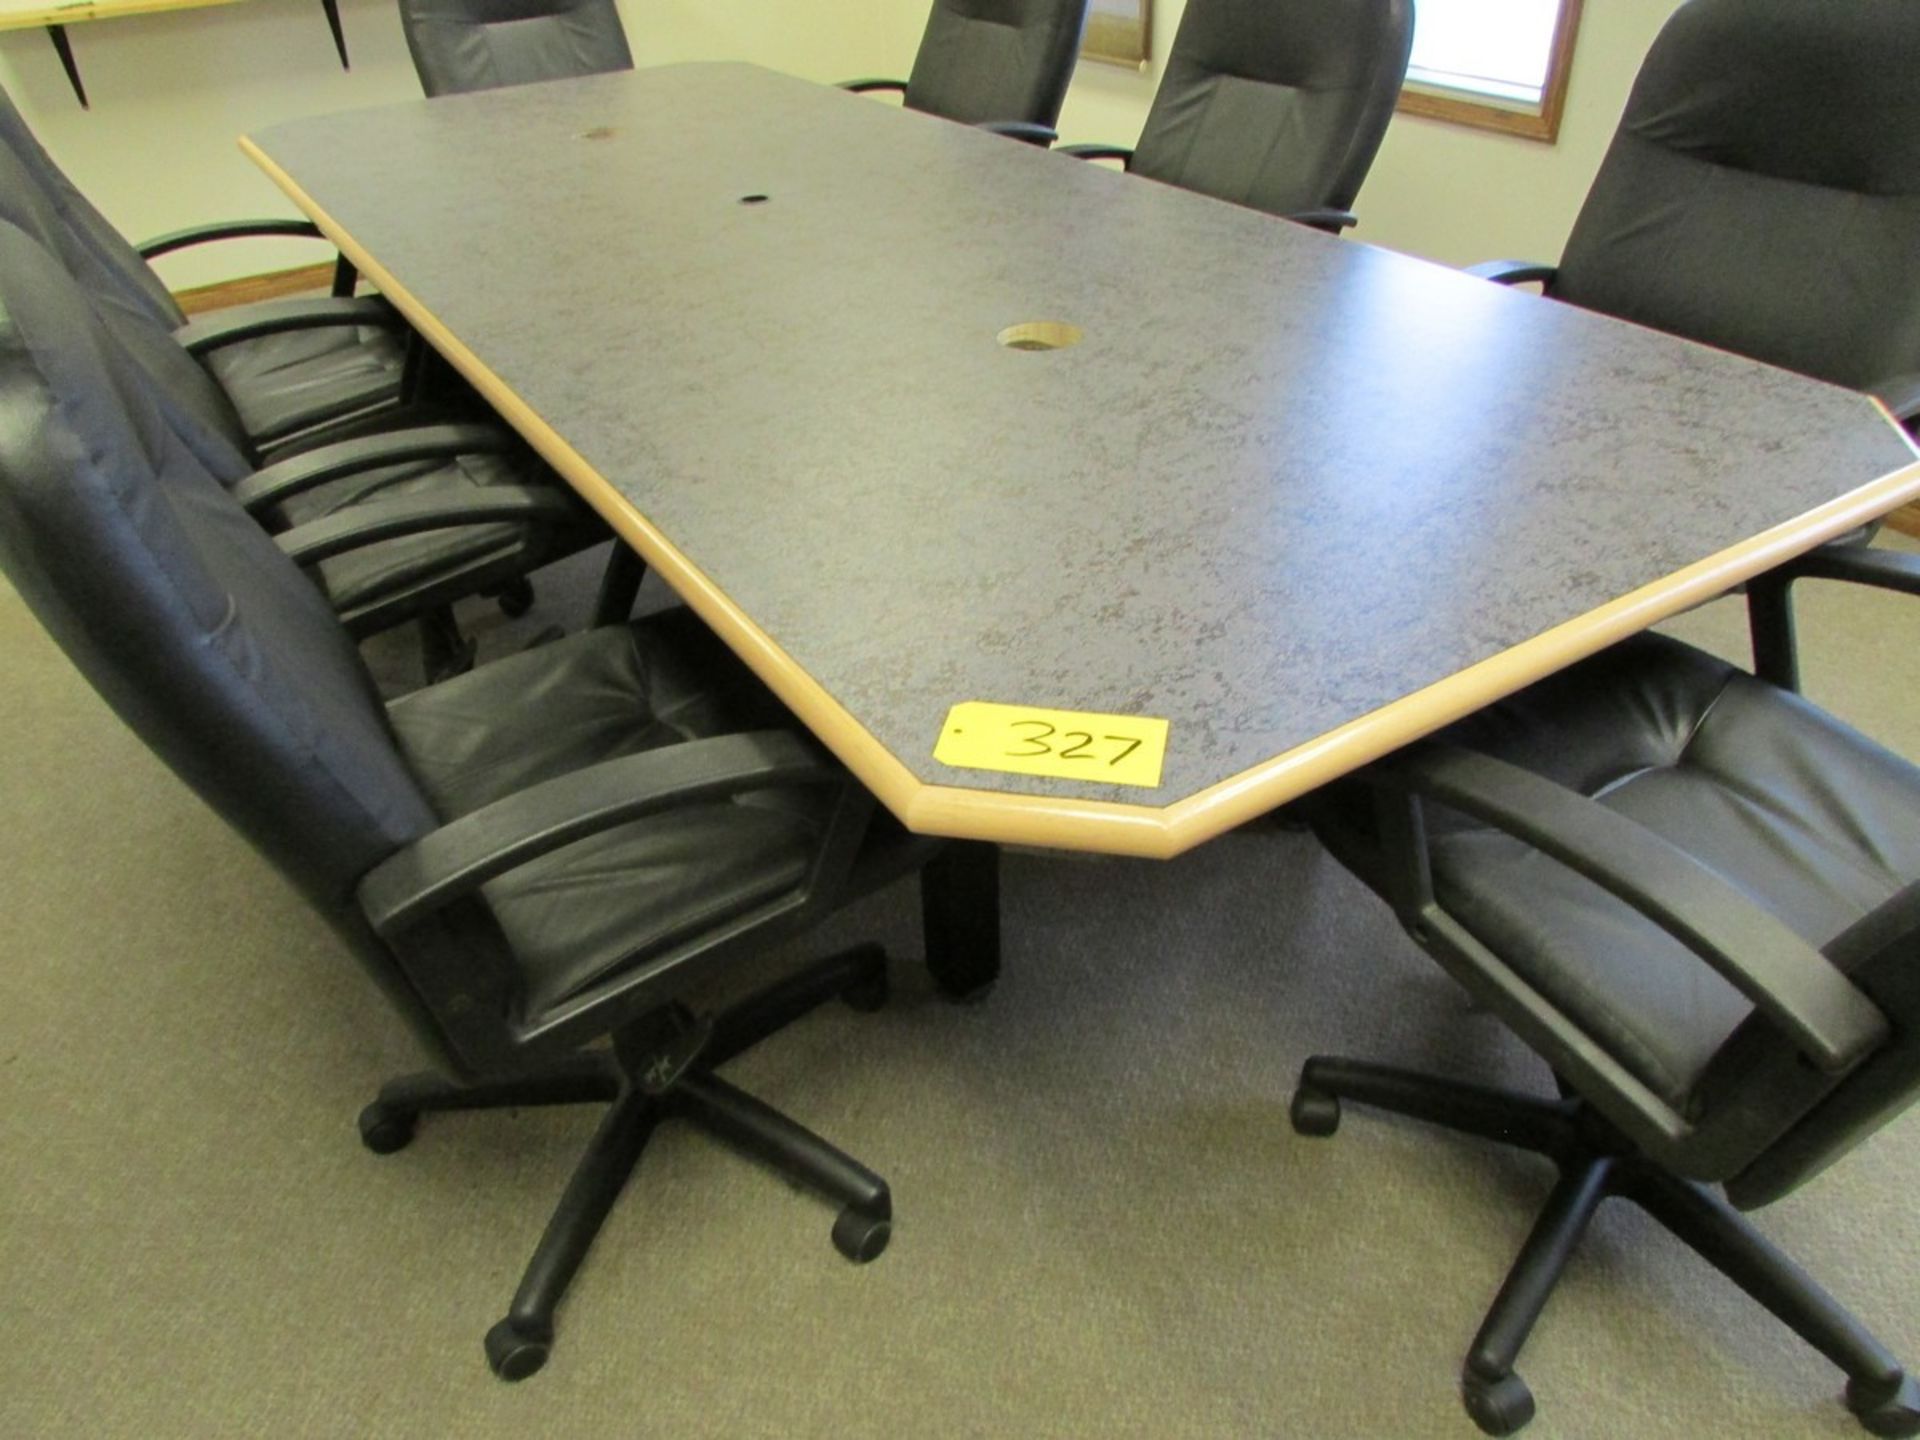 Boardroom table 4' x 10' w/ 8 swivel office chairs, side table, wood cabinet, and easel